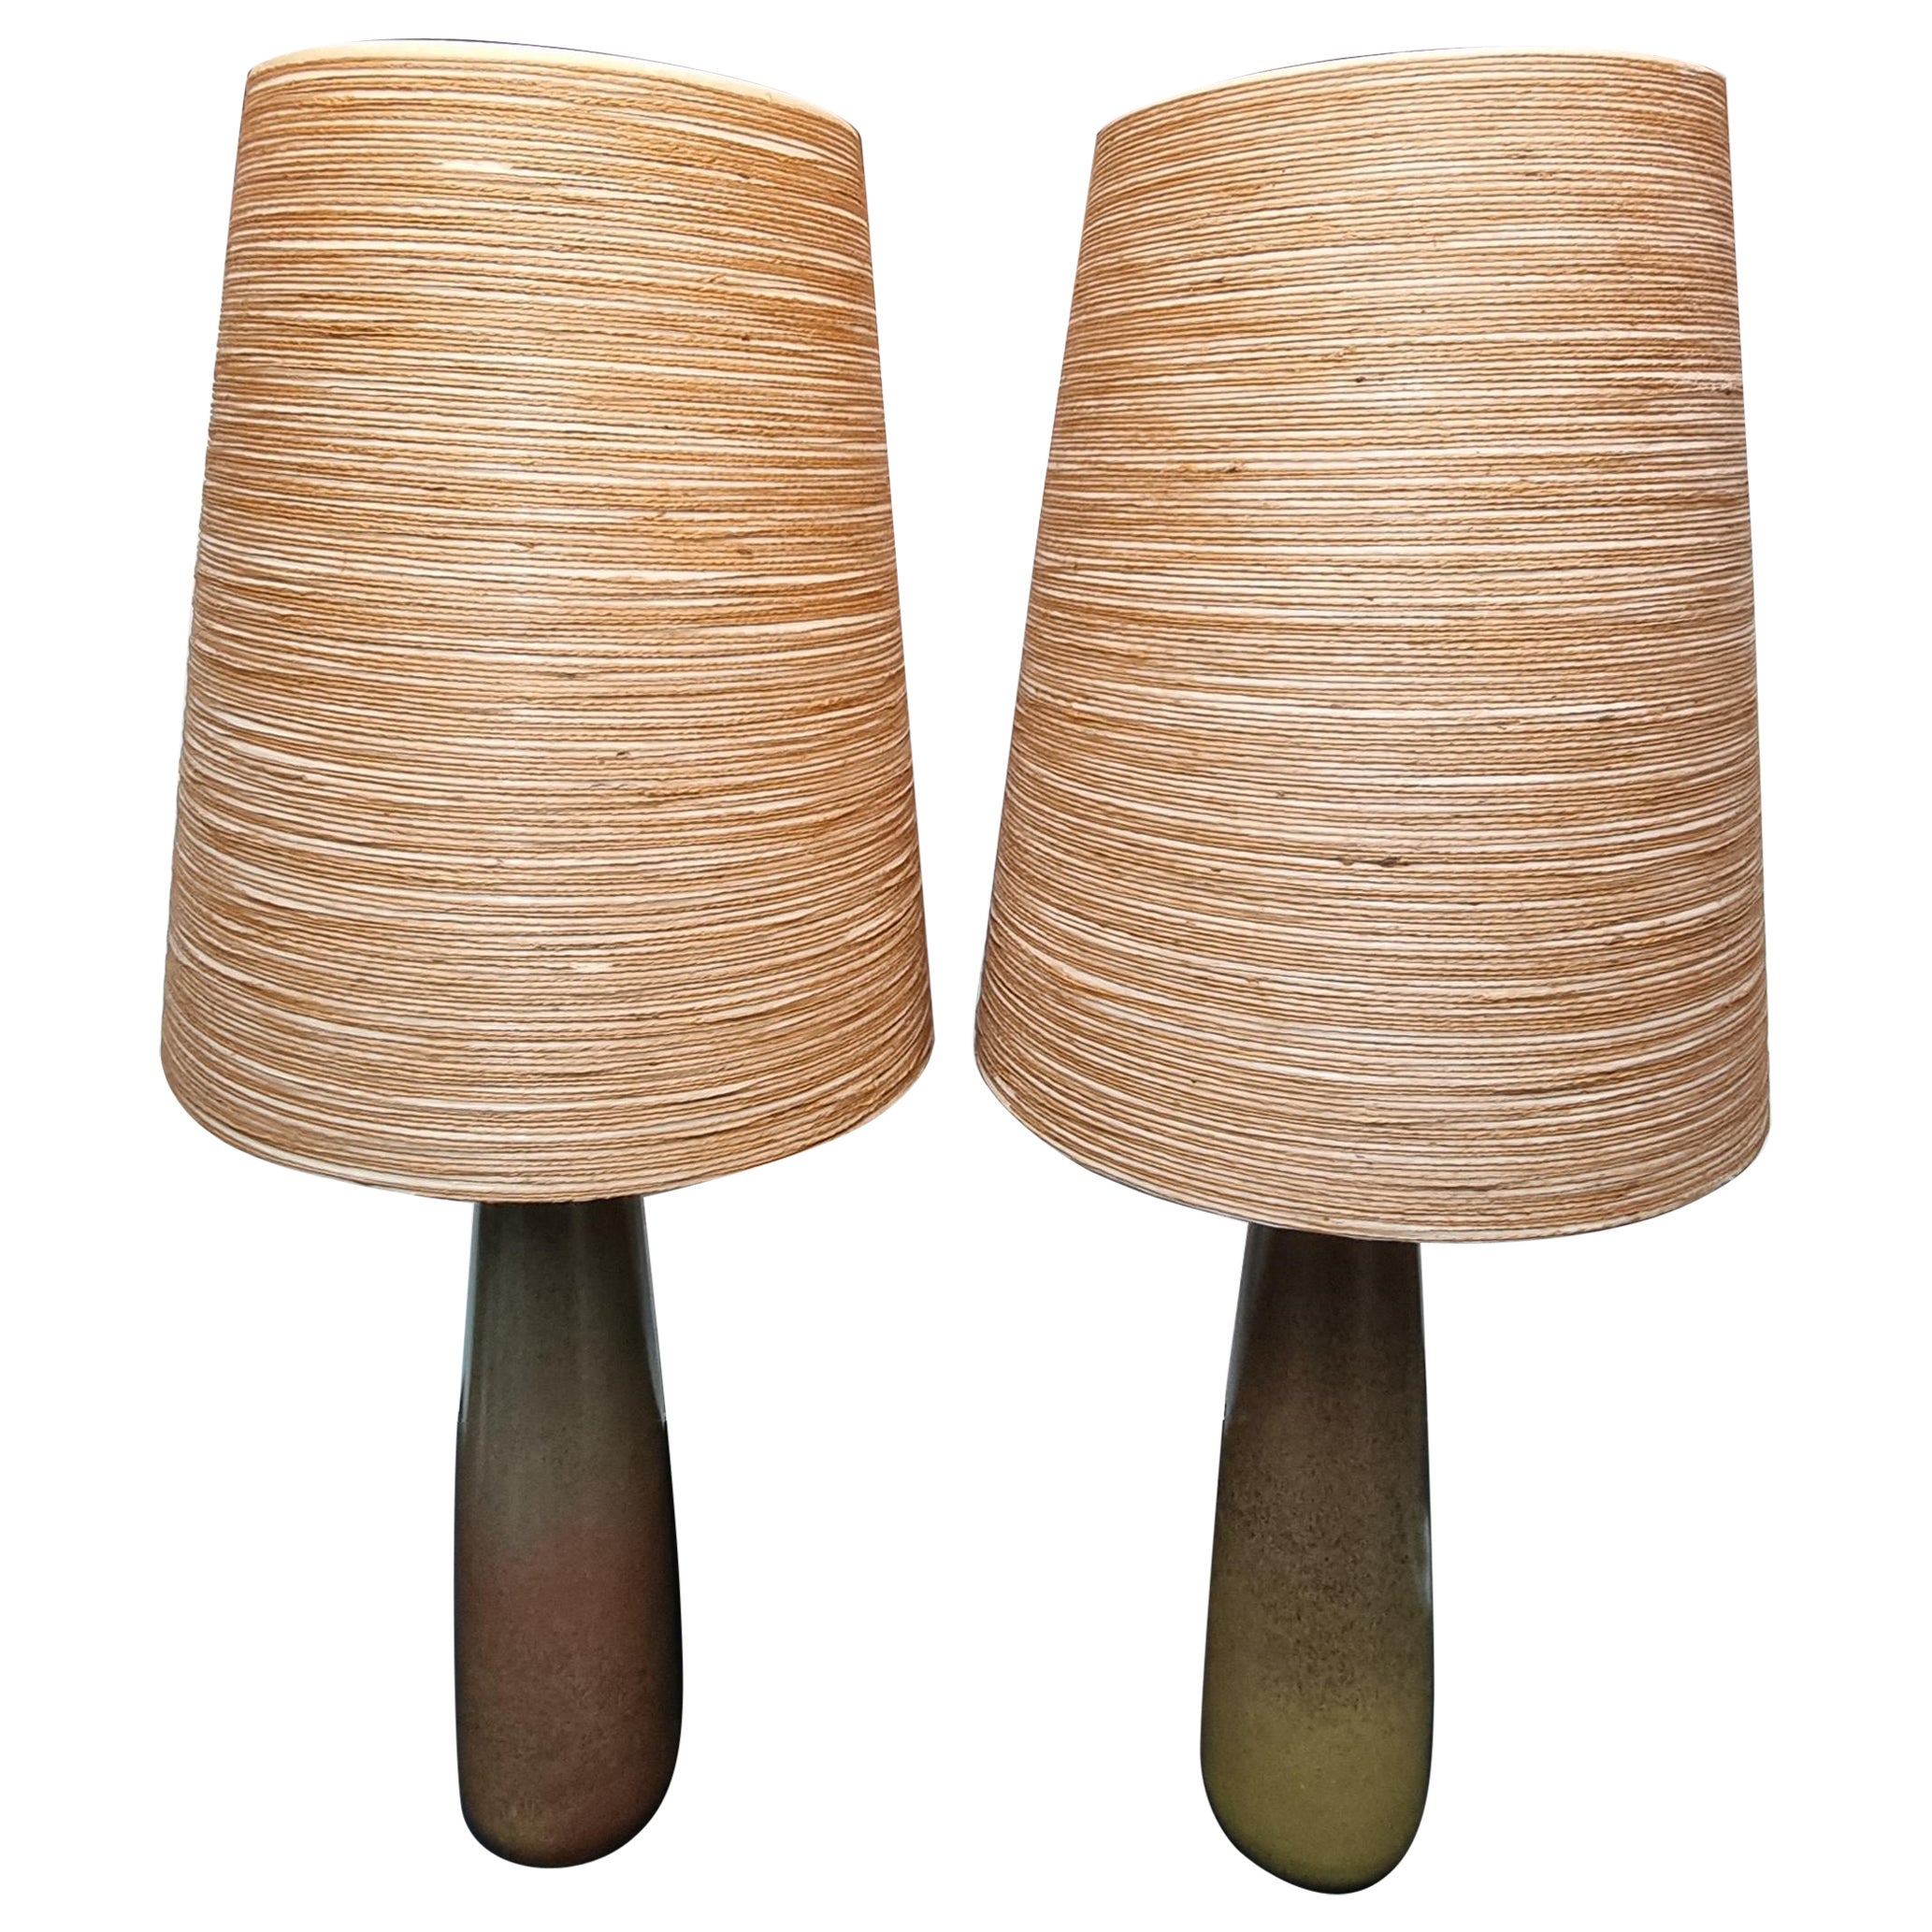 Impressive Large Pair of 1960's Ceramic Lamps by Lotte and Gunnar Bostlund 